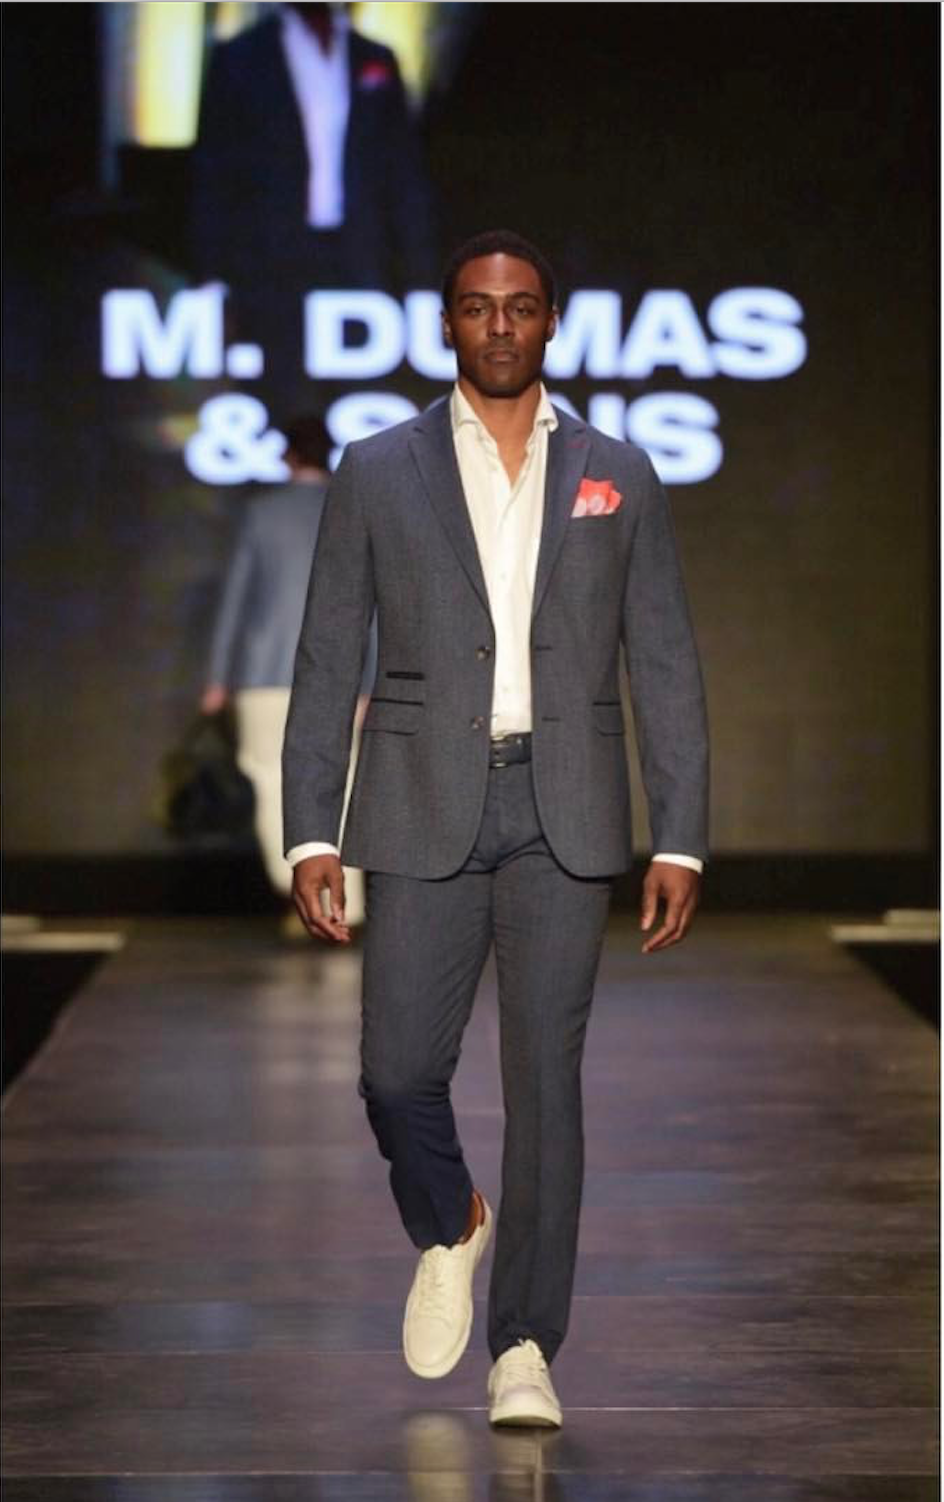 sneakers with suit m. dumas u0026 sons, charleston fashion week, sneakers and suit RQOCCRS